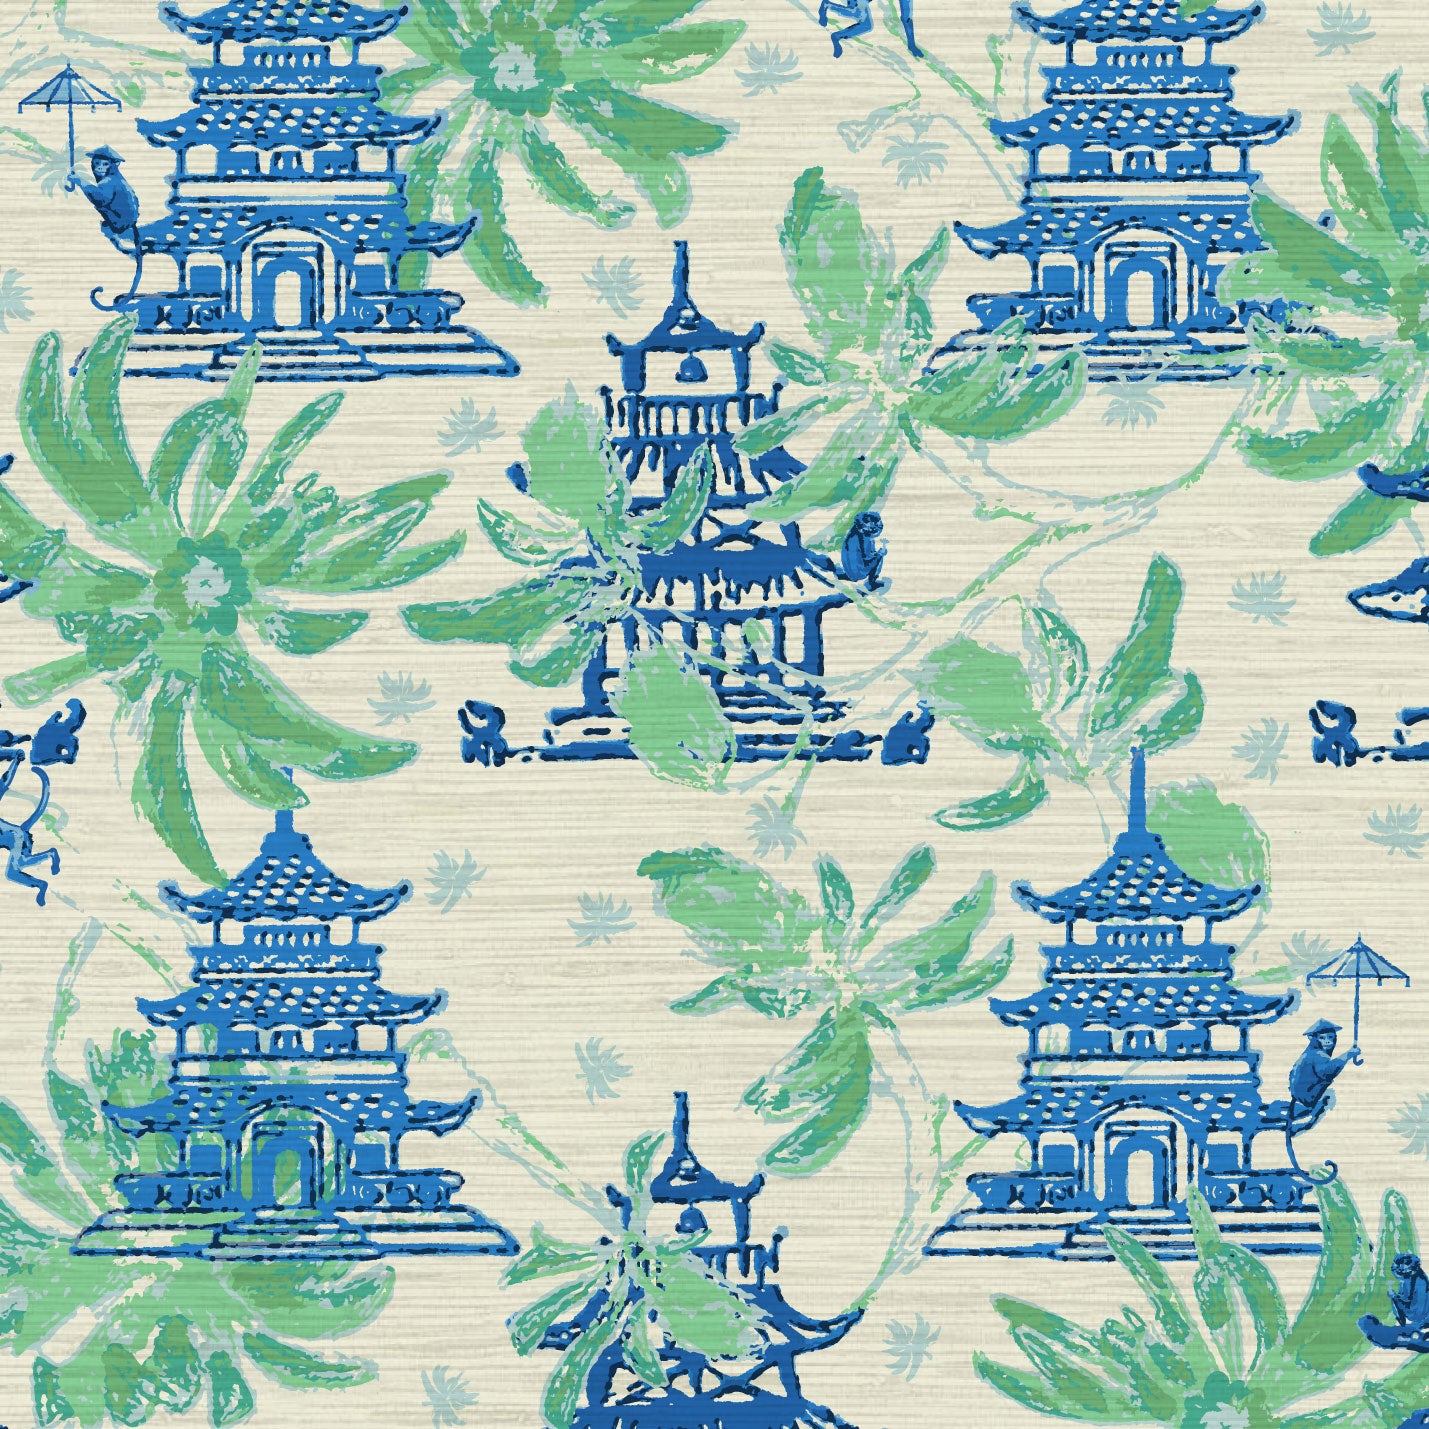 Natural Textured Eco-Friendly Non-toxic High-quality  Sustainable practices Sustainability Wall covering Wallcovering Wallpaper luxury bespoke custom interior design asian inspired green palm leaf garden print floral tree branches pagoda shades of blue french blue monkey retro chic grid  Chinoiserie chinese classic chintz french blue green